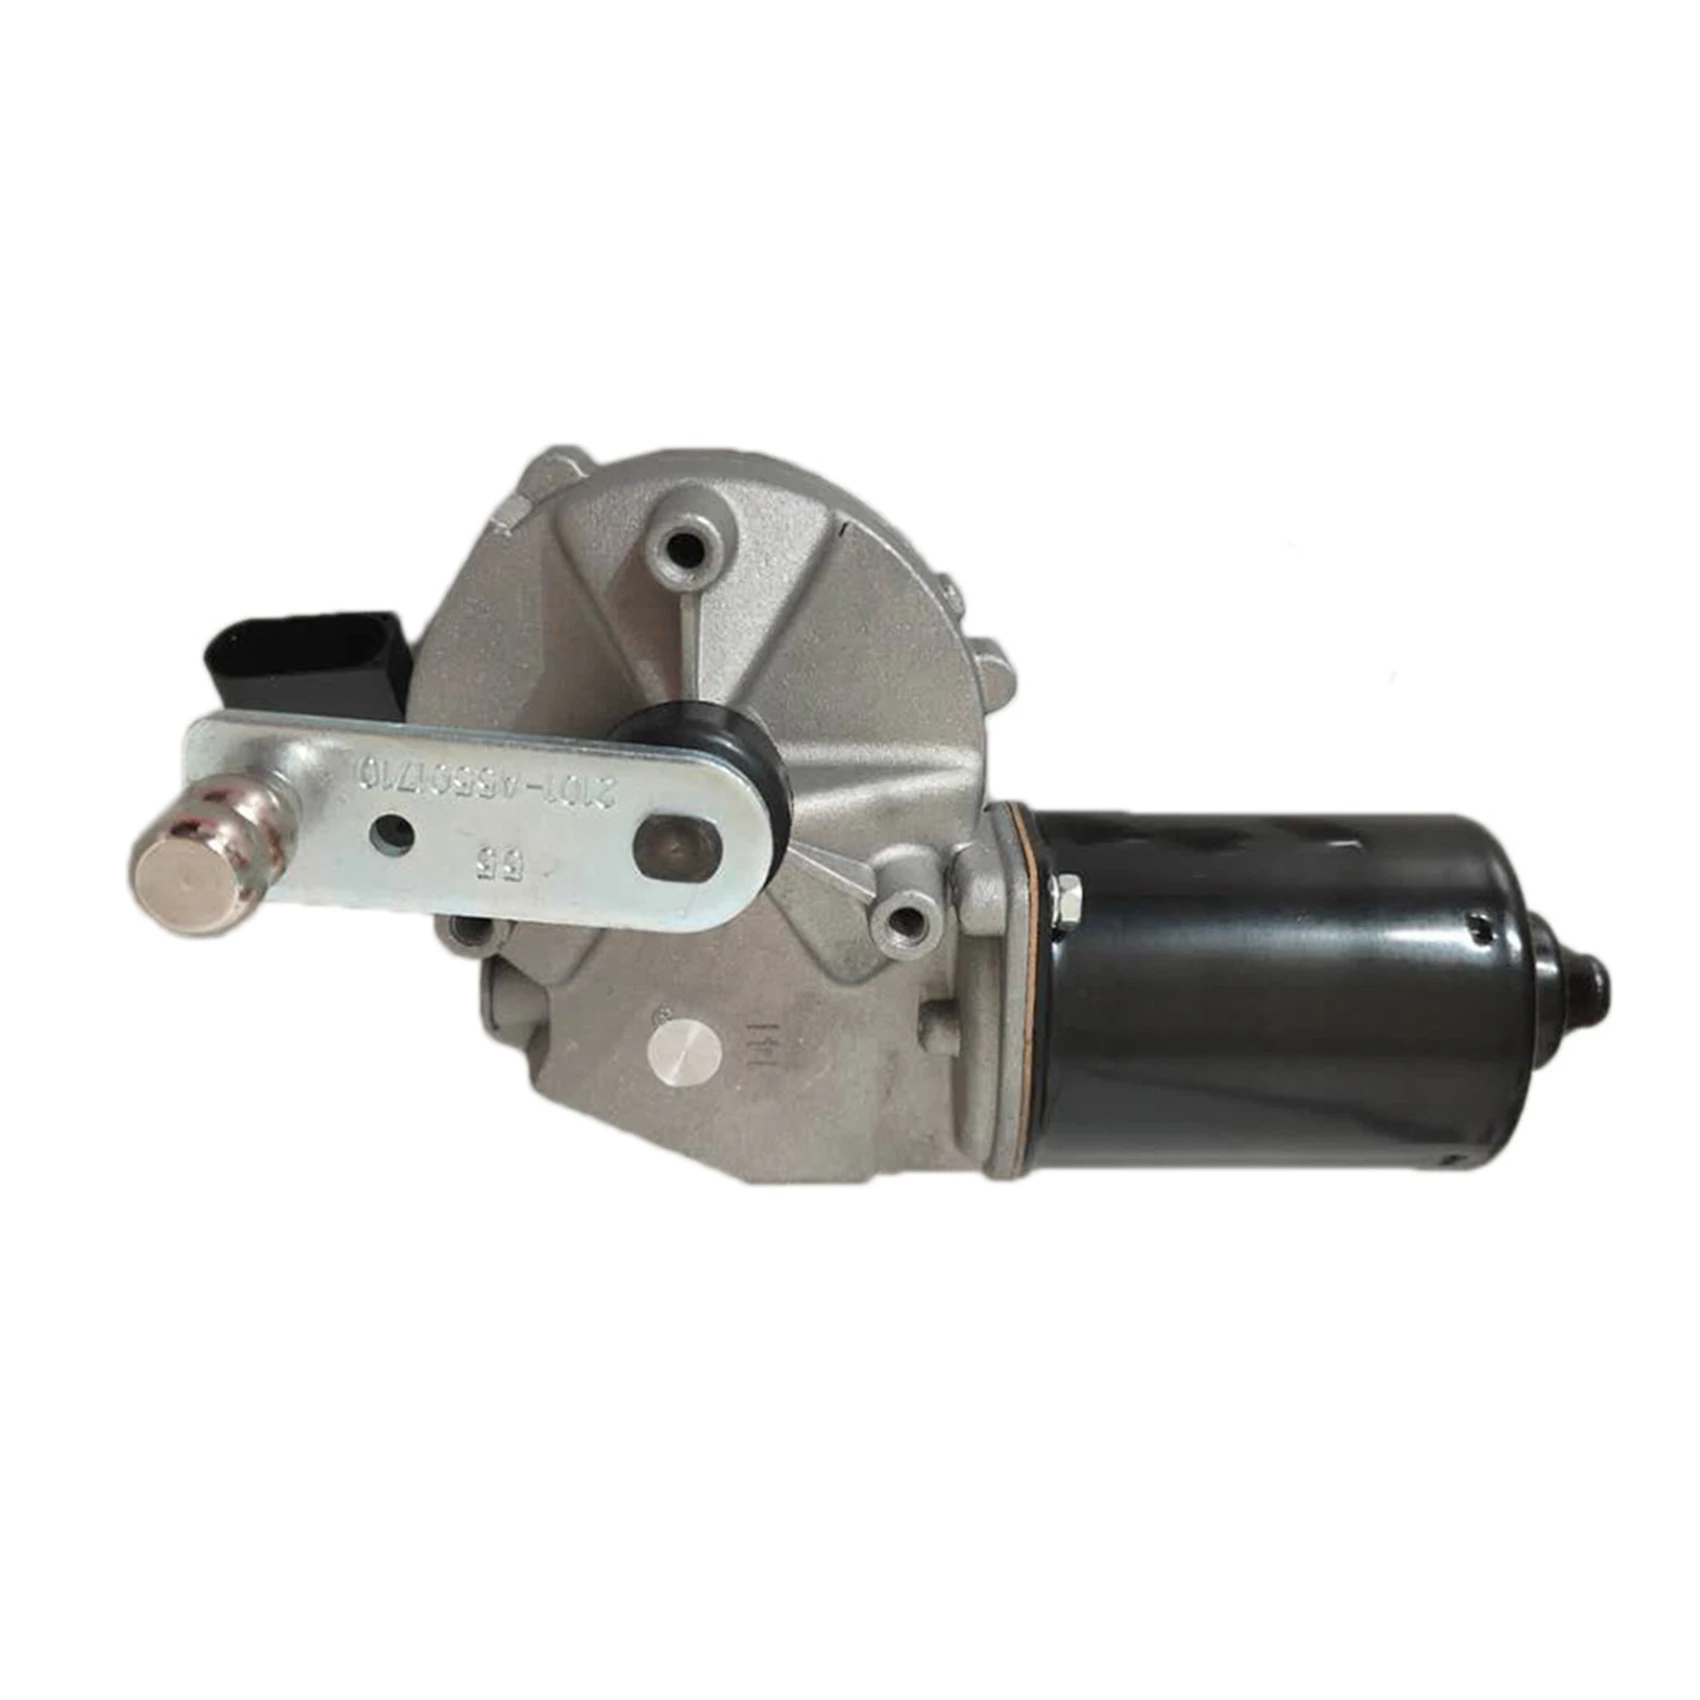 

A1648201742 Front Windshield Wiper Motor for Level X164 2006-2012 M Class W164